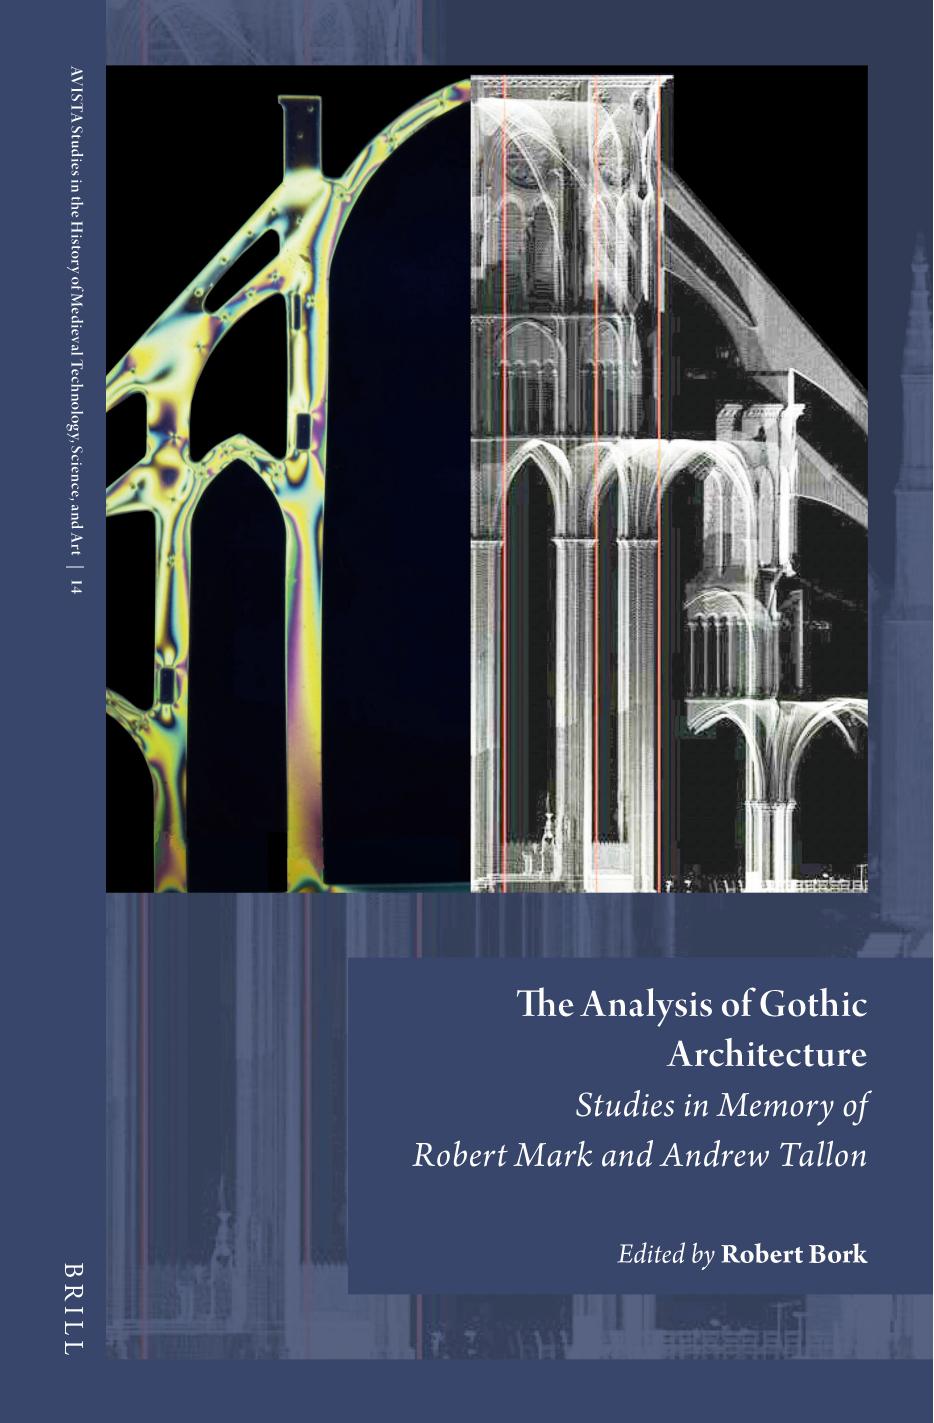 The Analysis of Gothic Architecture by Robert Bork;